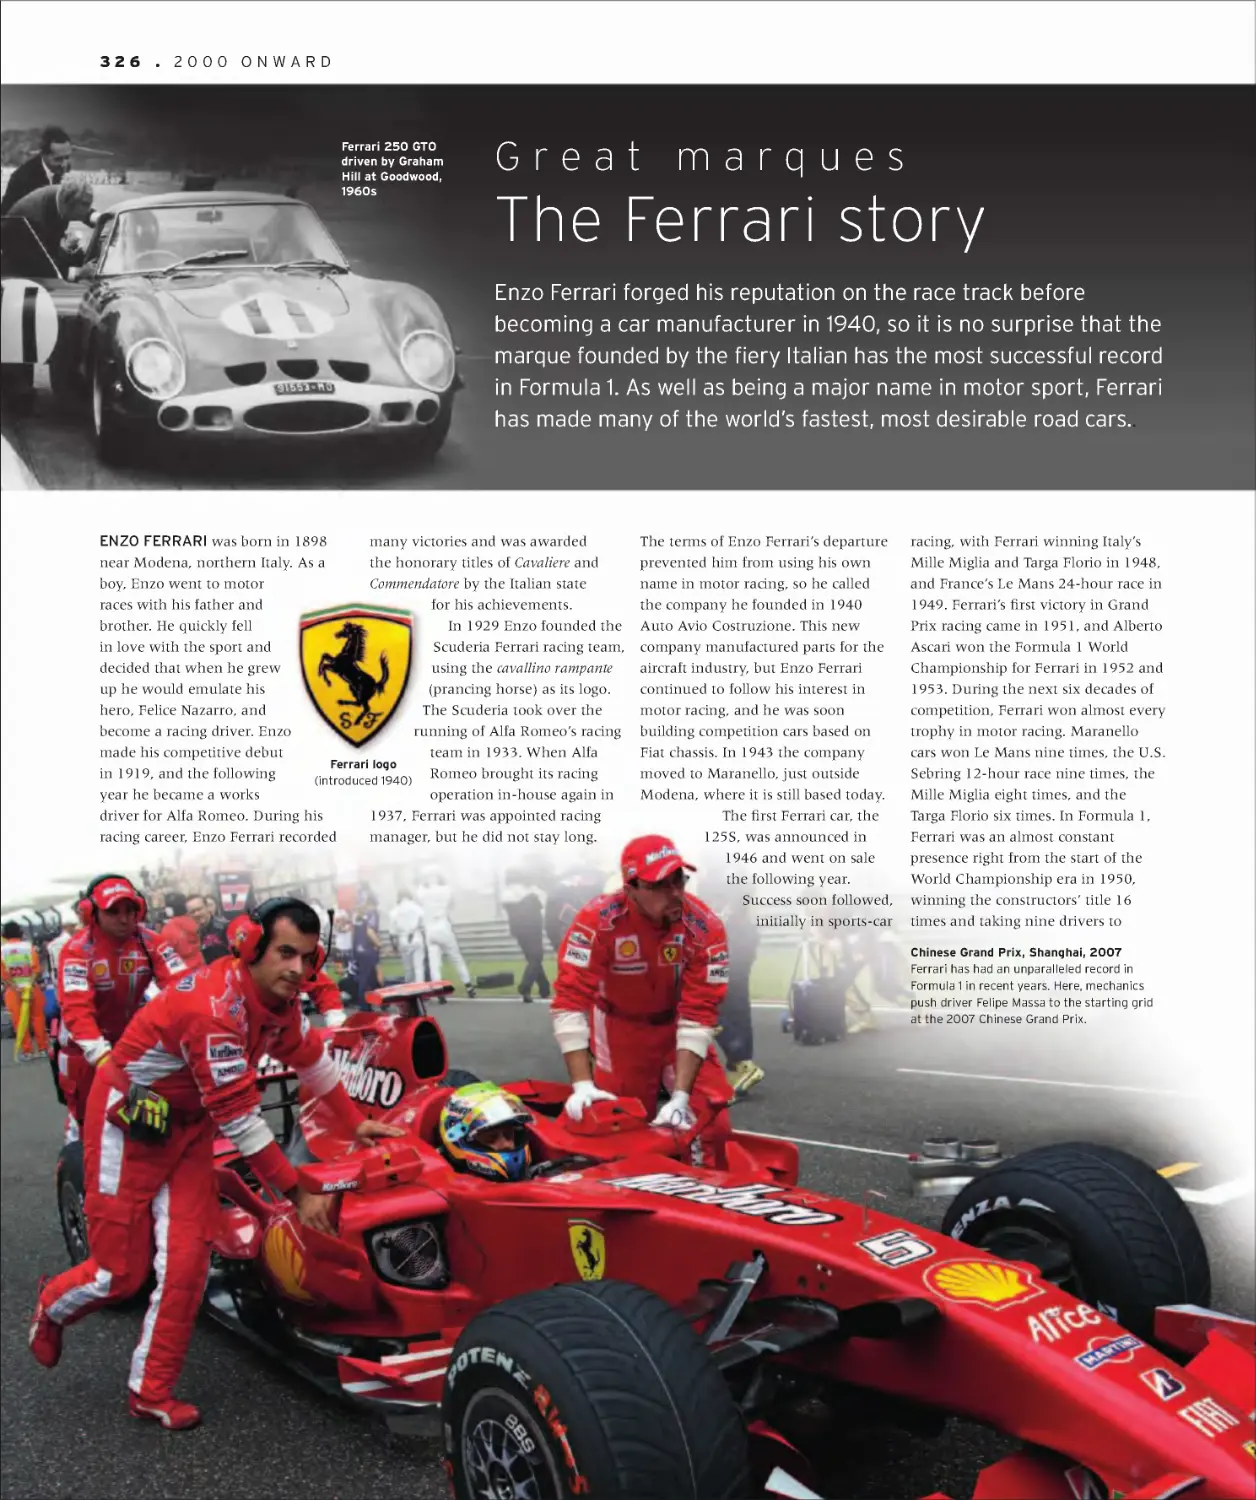 Great marques: The Ferrari story 326